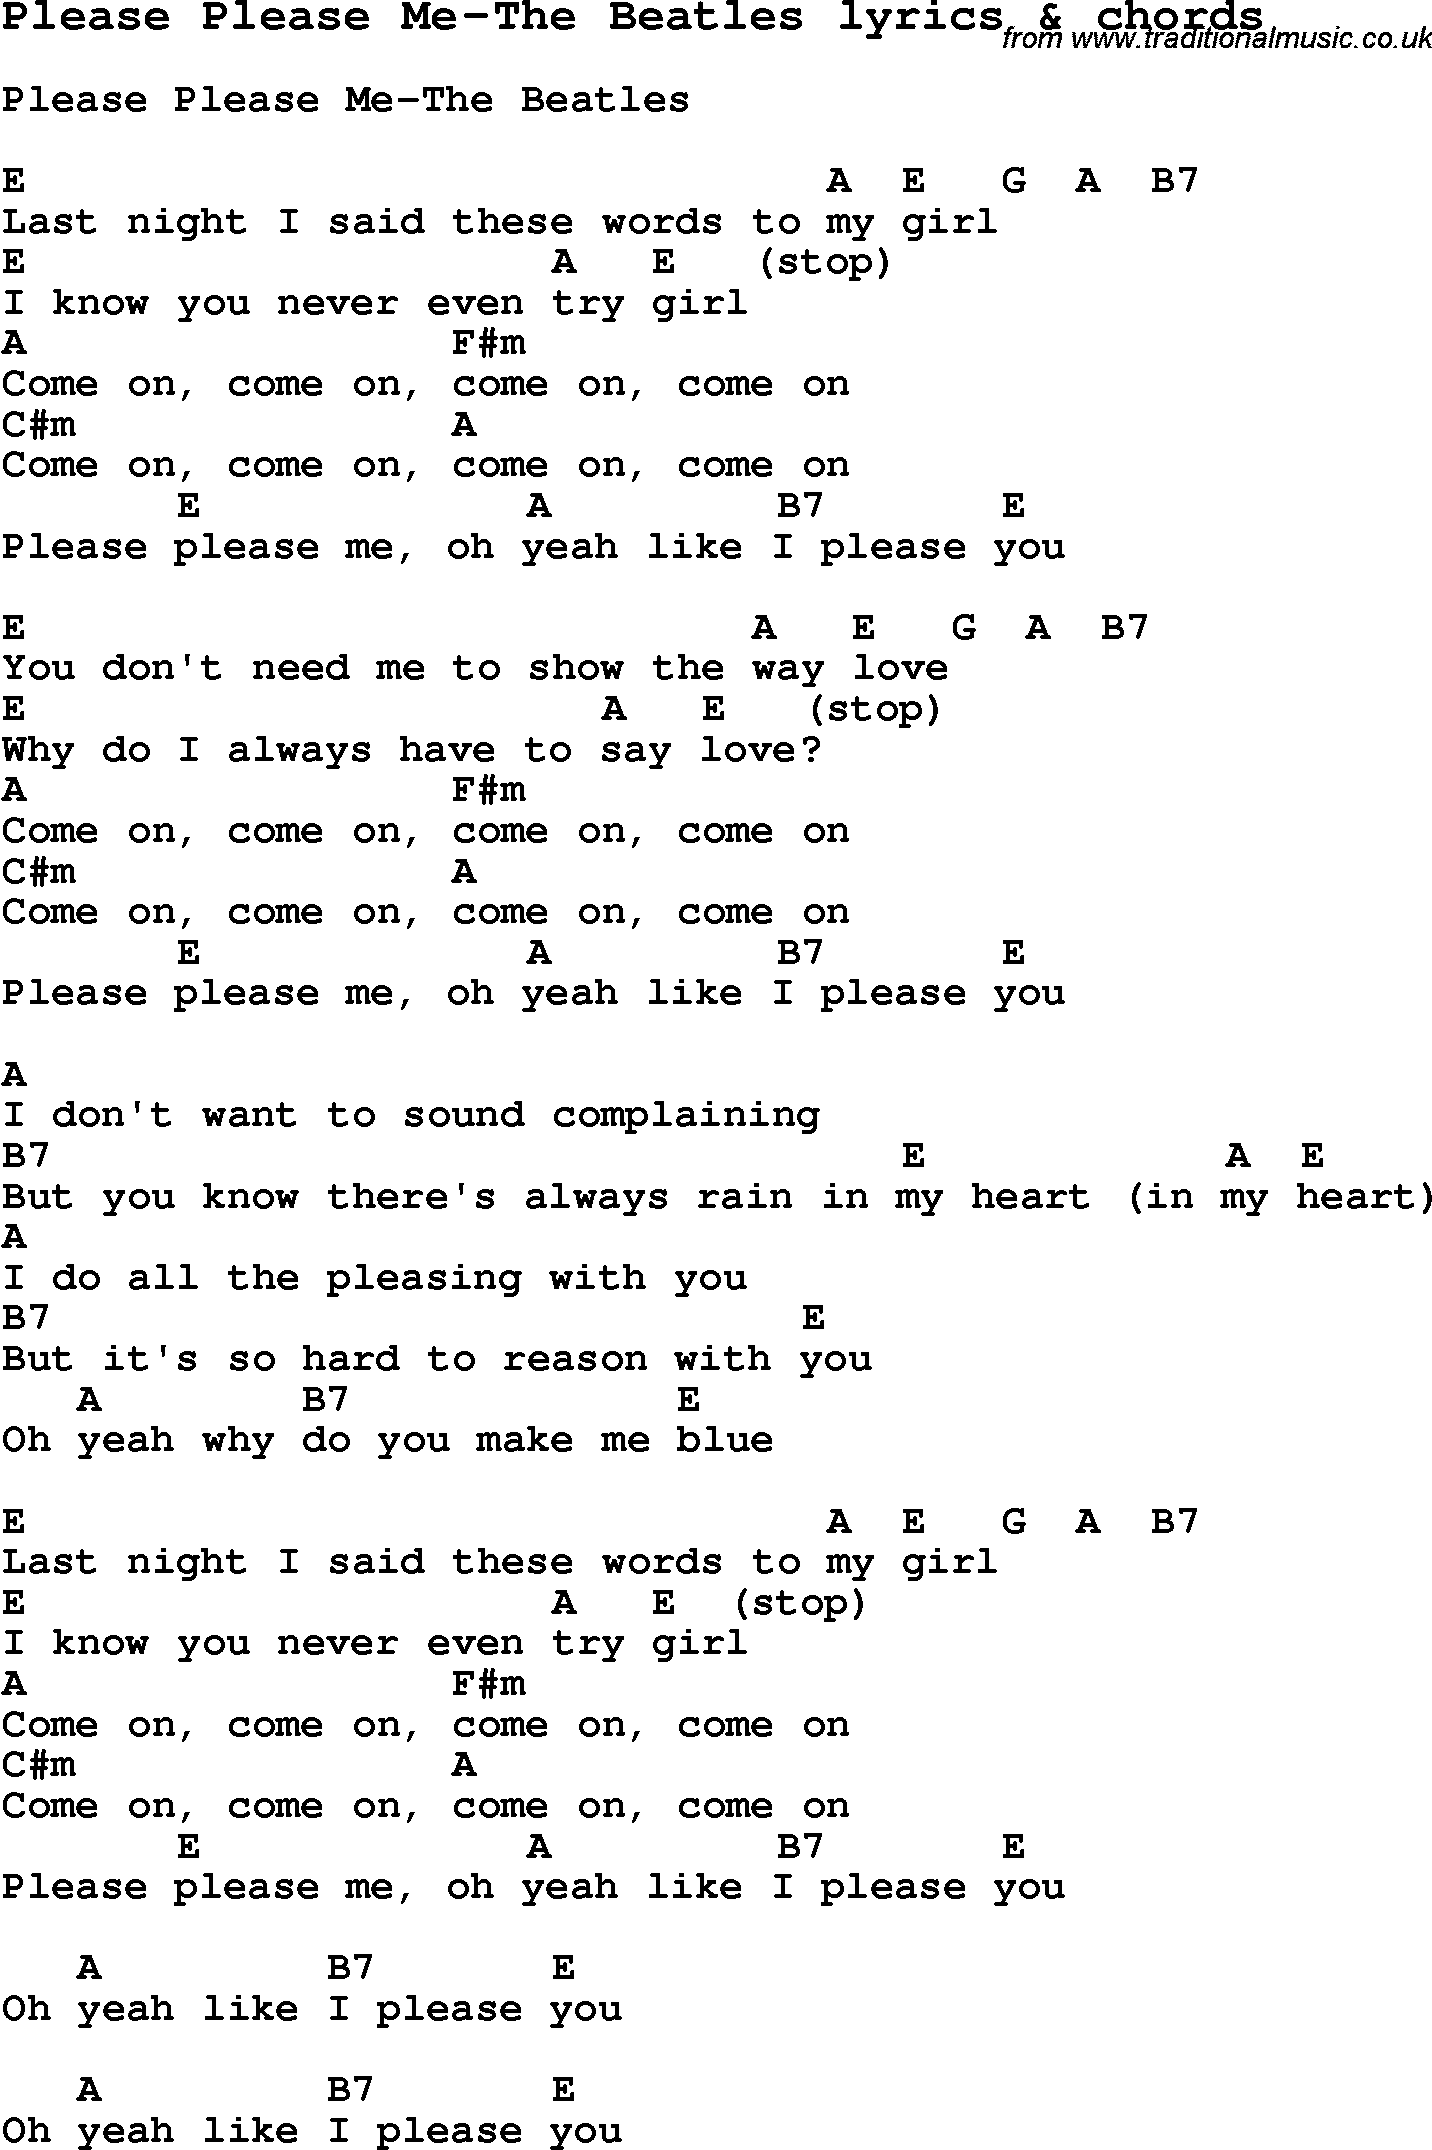 Love Song Lyrics for: Please Please Me-The Beatles with chords for Ukulele, Guitar Banjo etc.